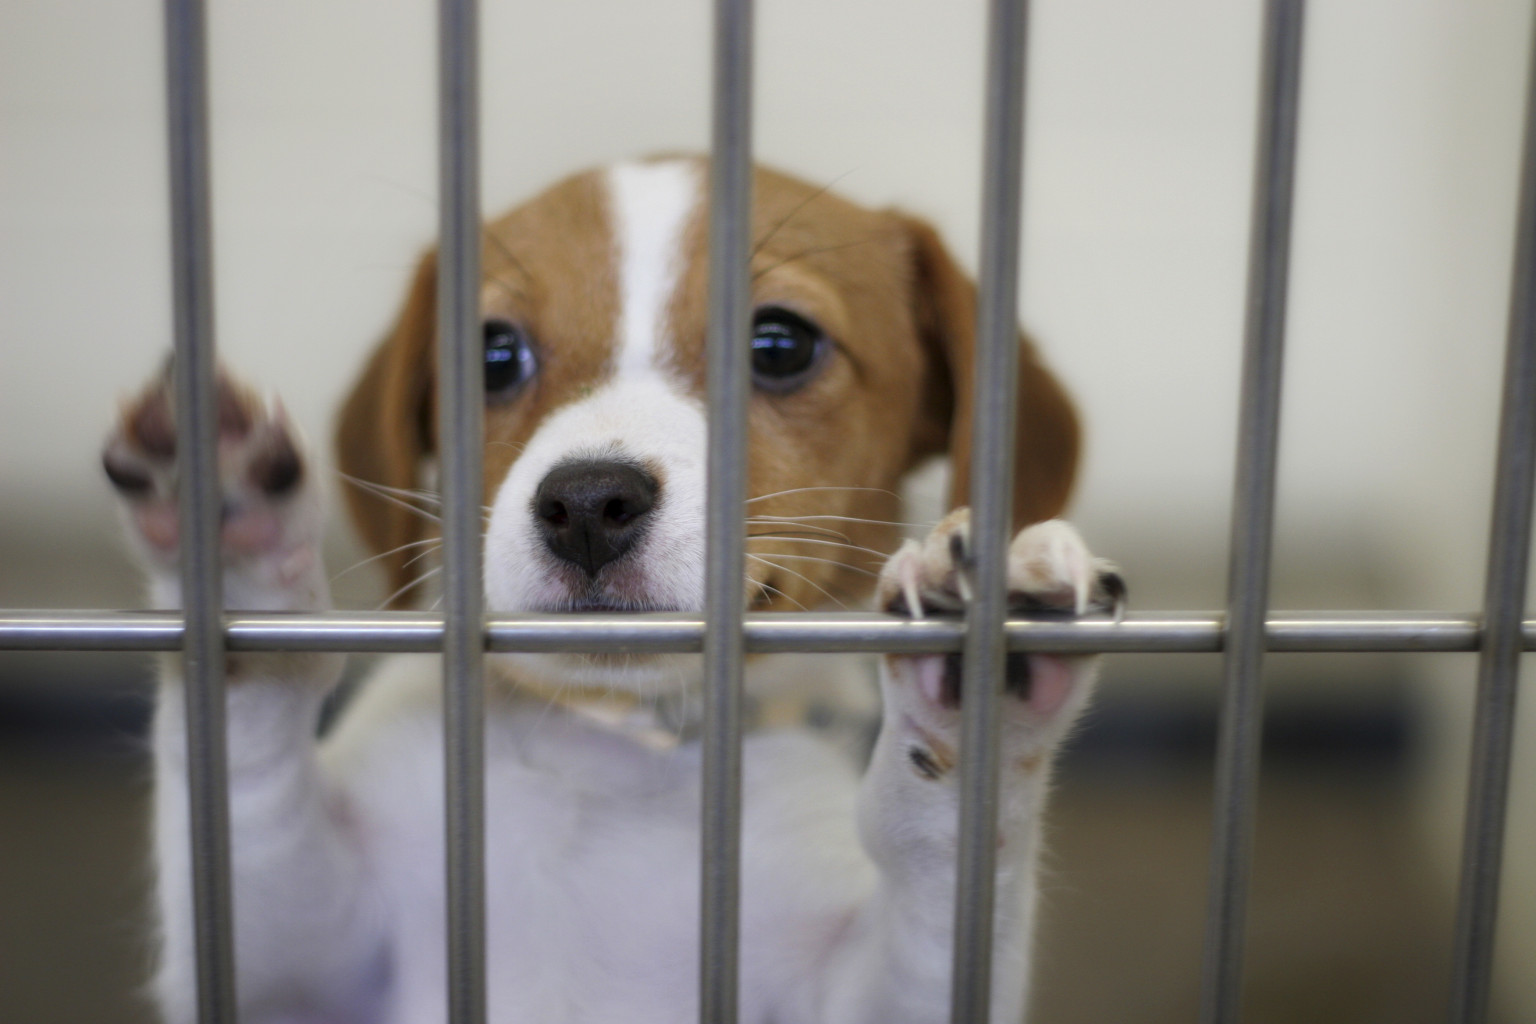 Different Types Of Animal Shelters. - Lessons - Blendspace